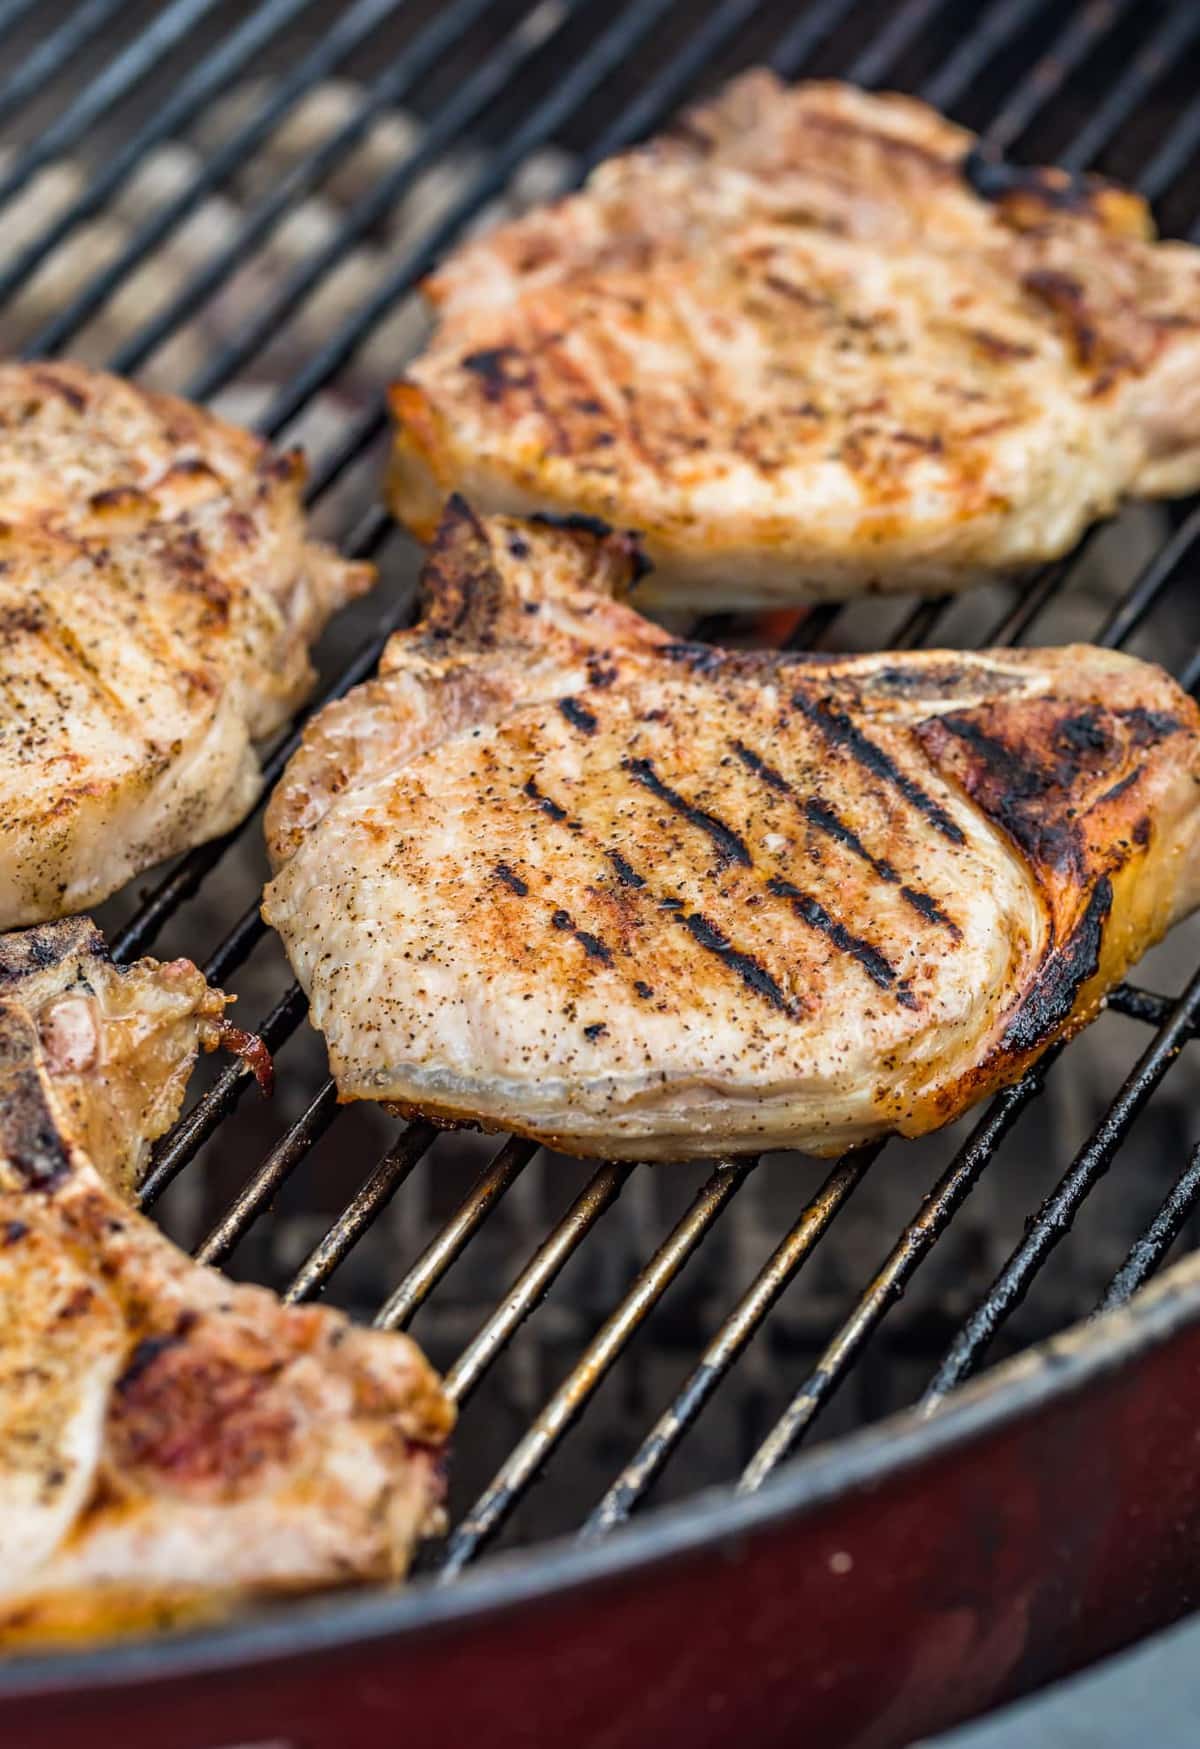 Grilled pork chops on a grill